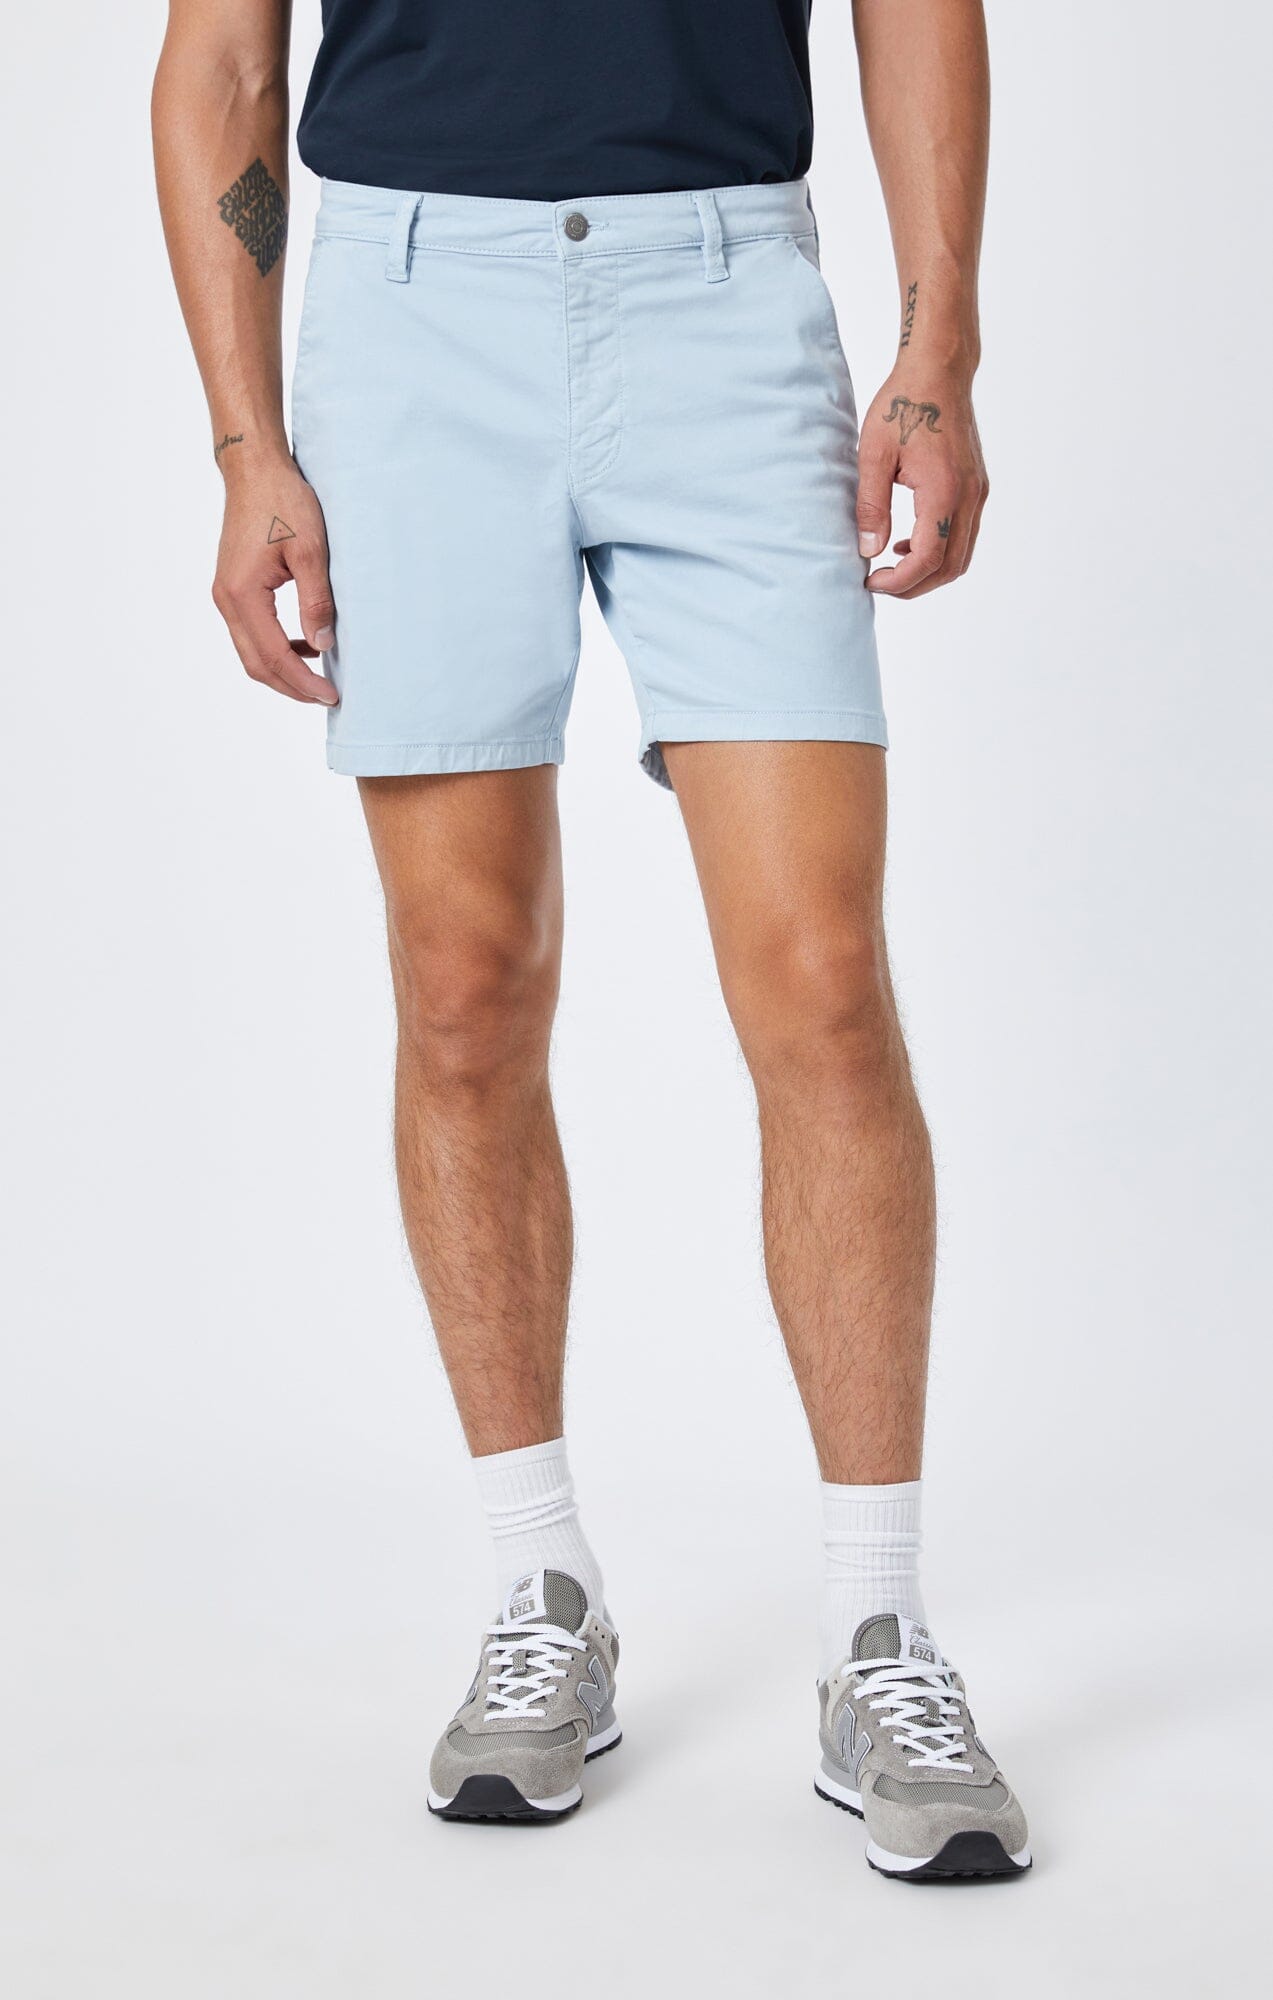 Joules Cruise Blue Mid Thigh Length Chino Shorts